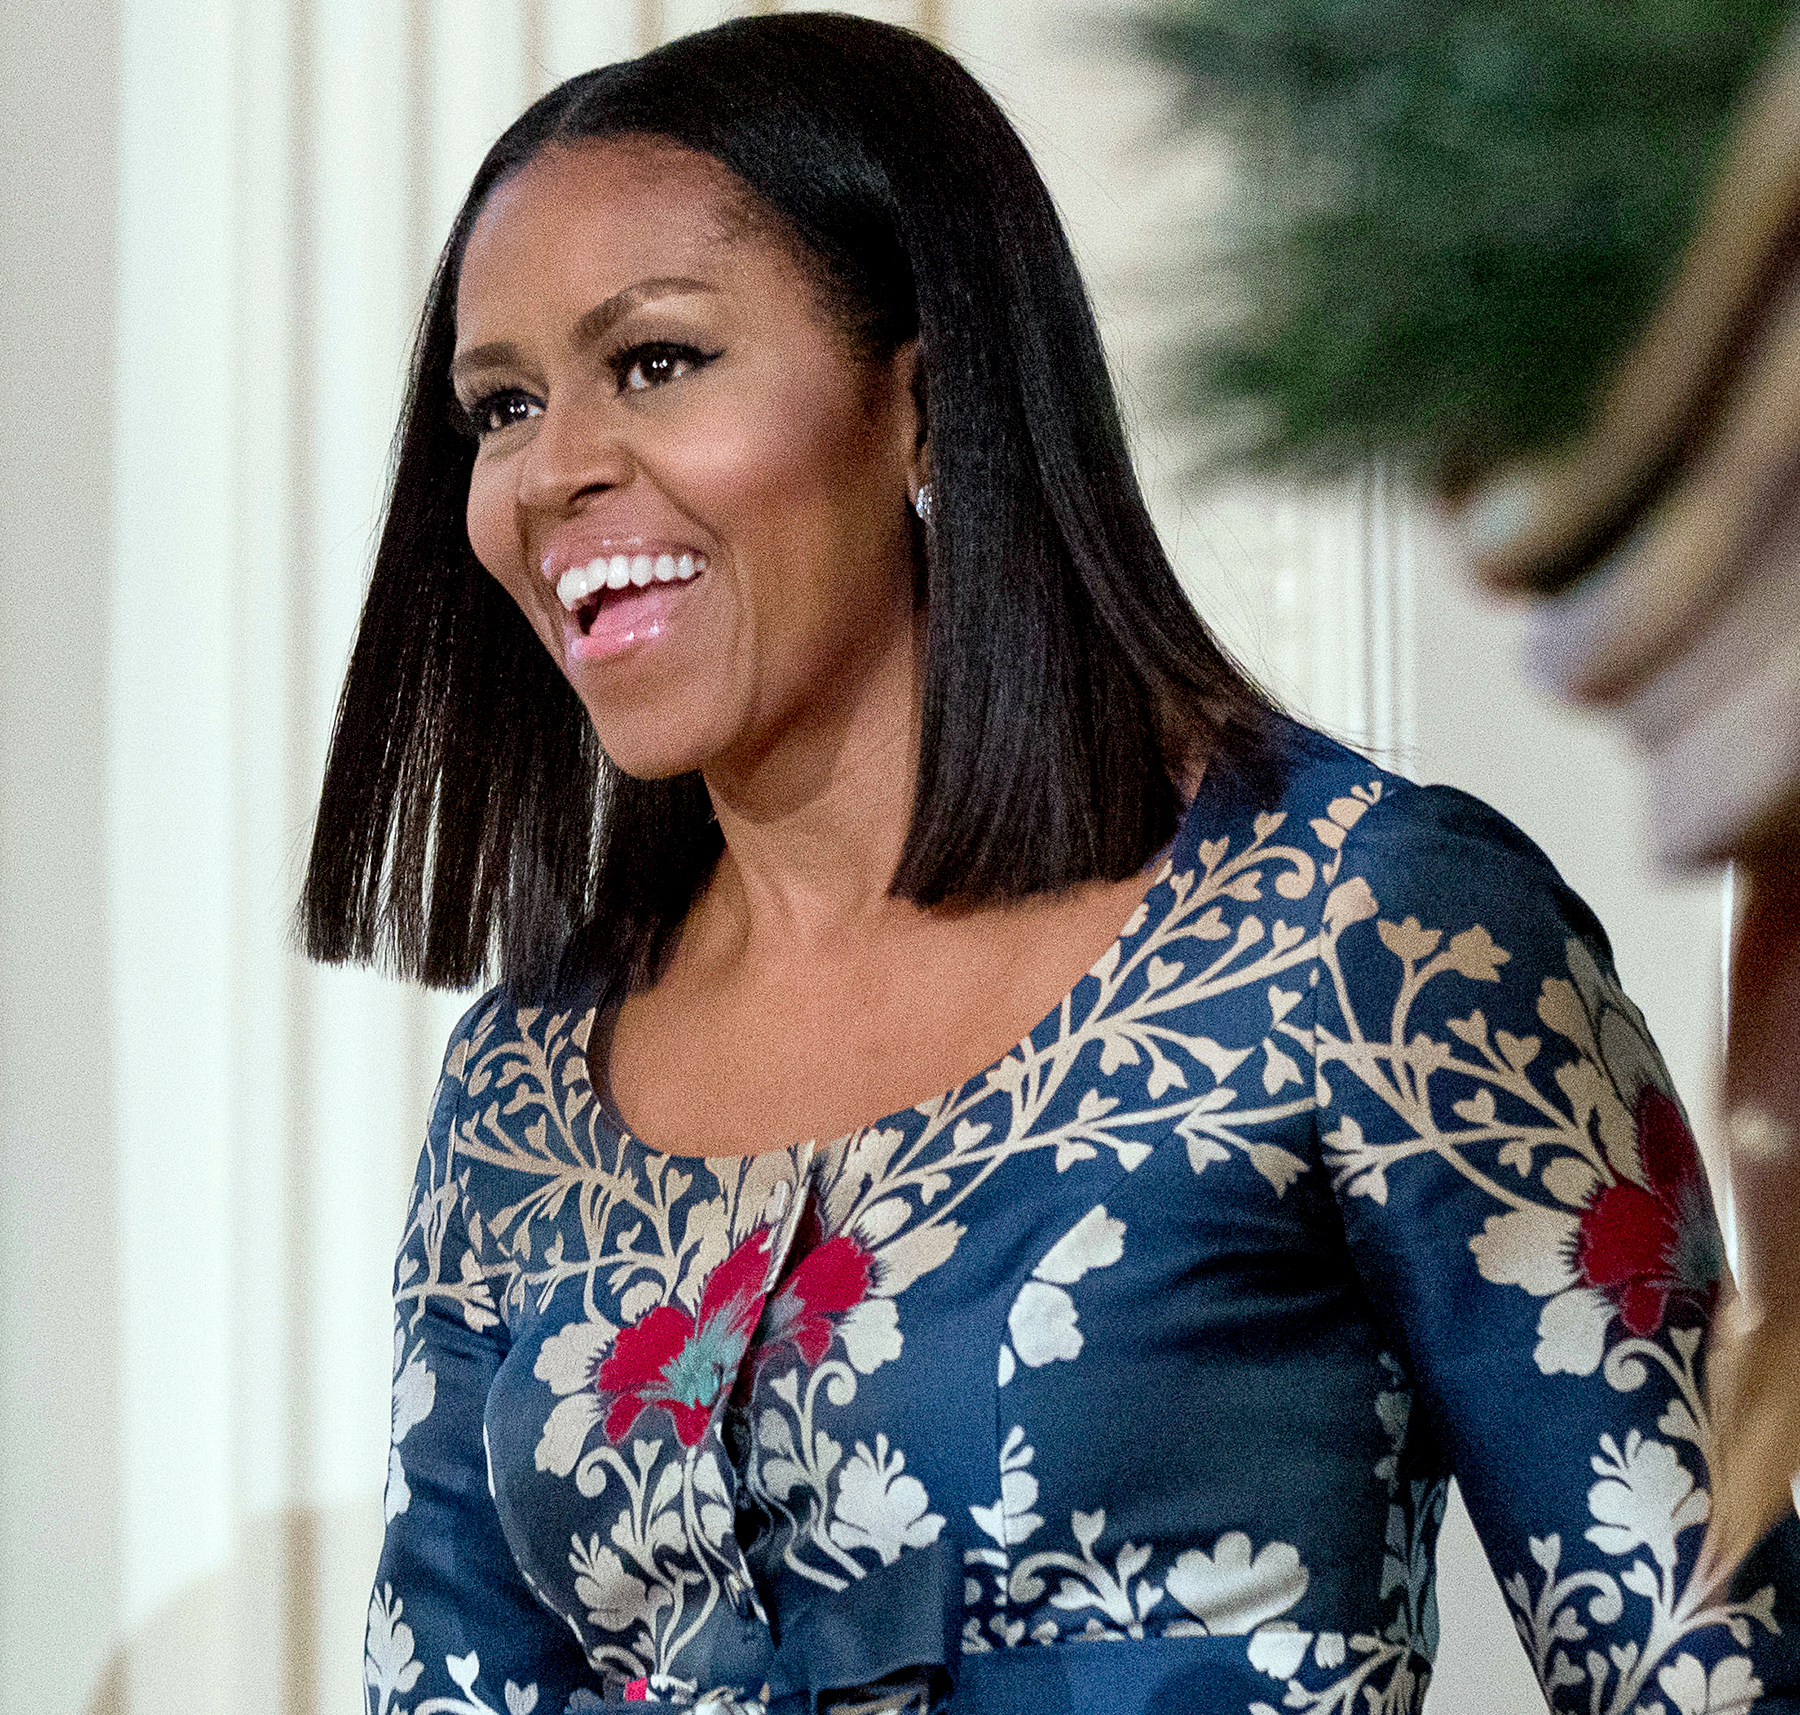 michelle obama debuts new hairstyle: pics